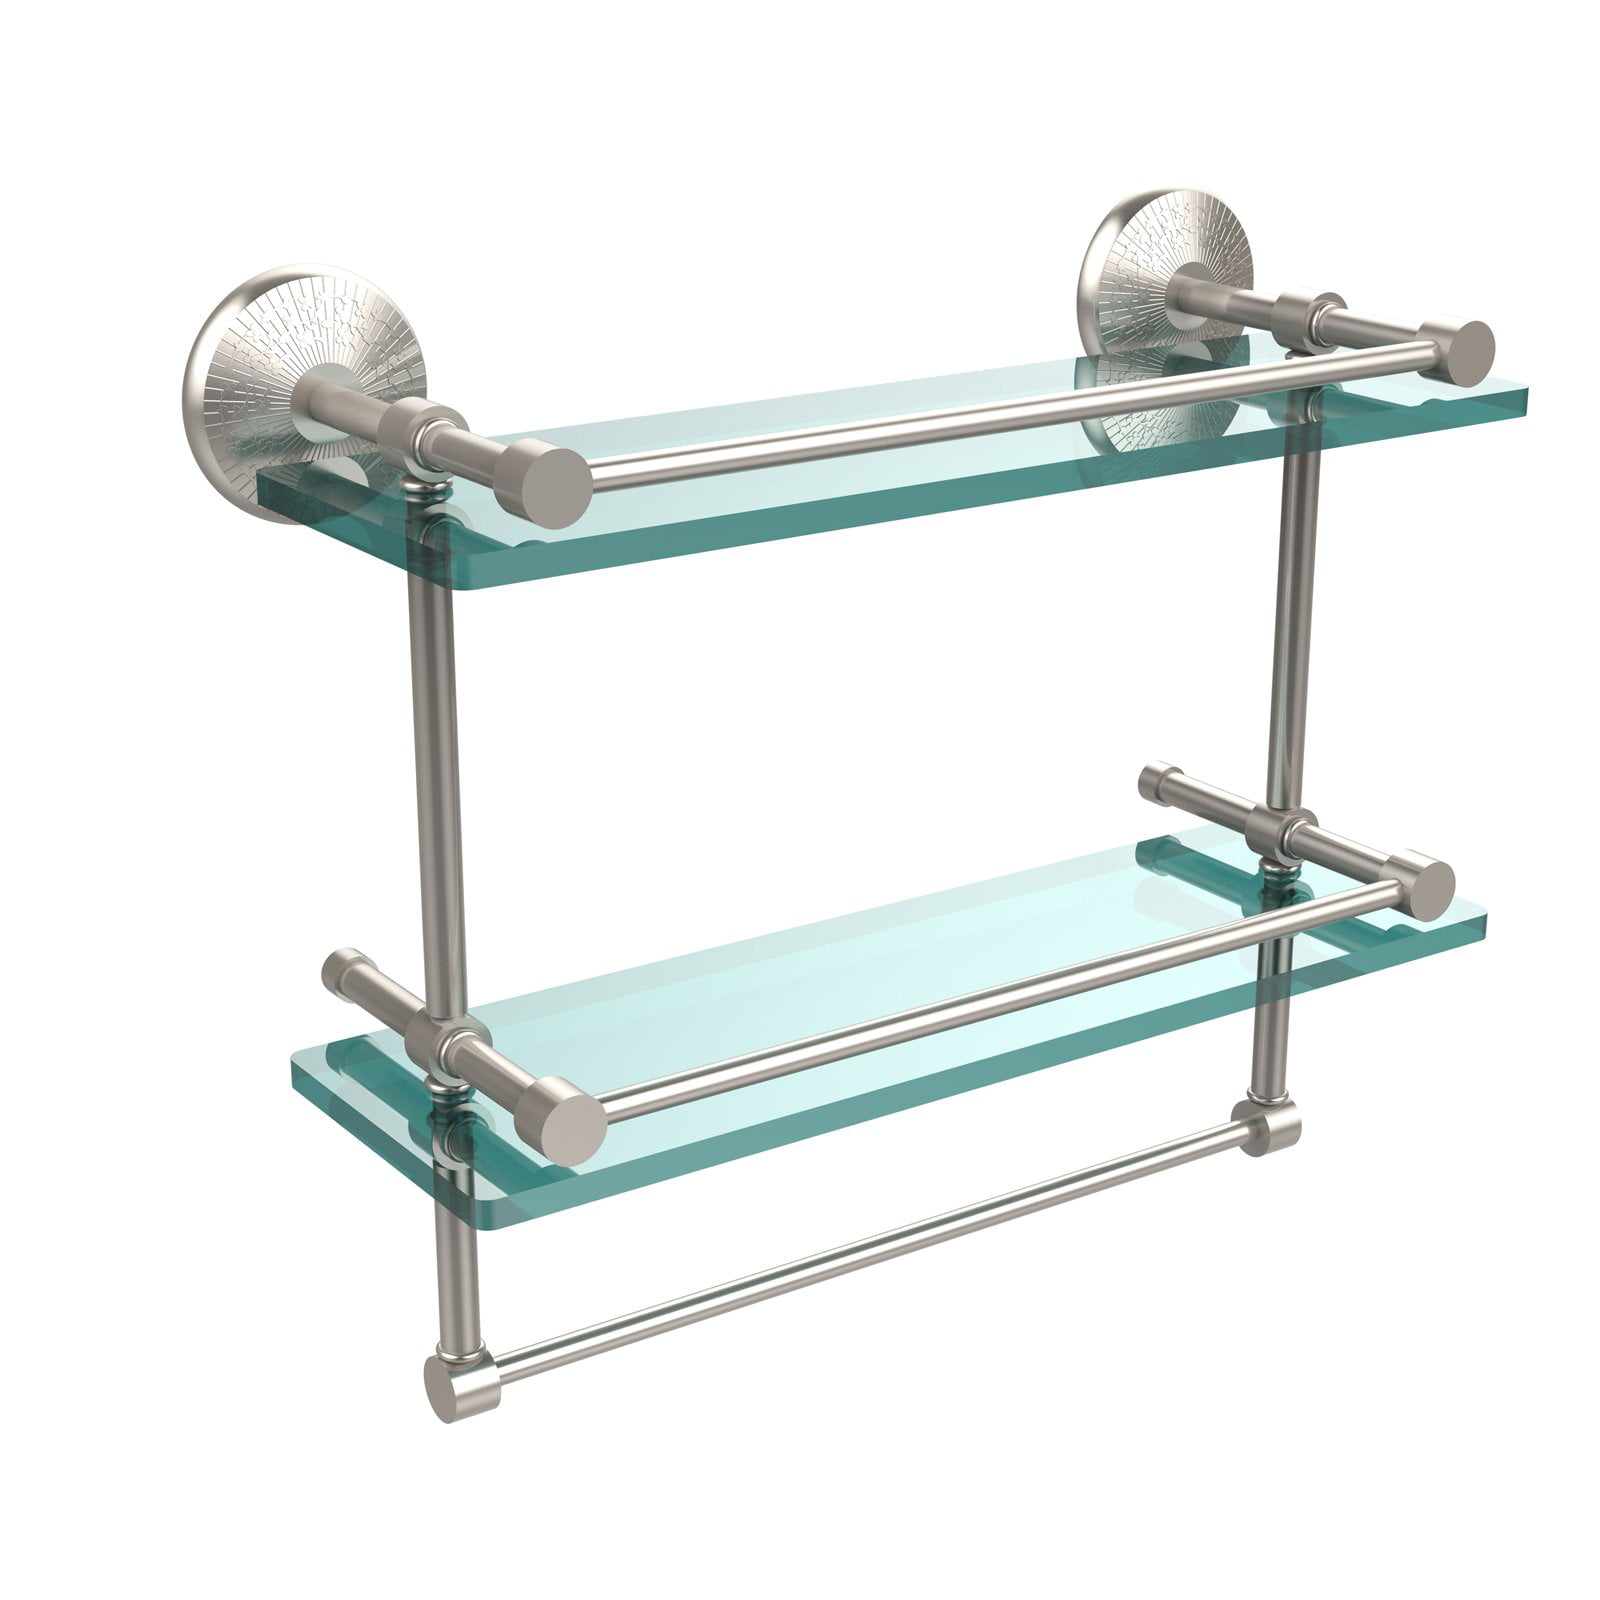 KES Glass Shelves for Bathroom BGS3201S60-2-P2 23.6 Inches Bathroom Shelf with Tempered Glass and Brushed Nickel Bracket Wall Mount 2 Pack 